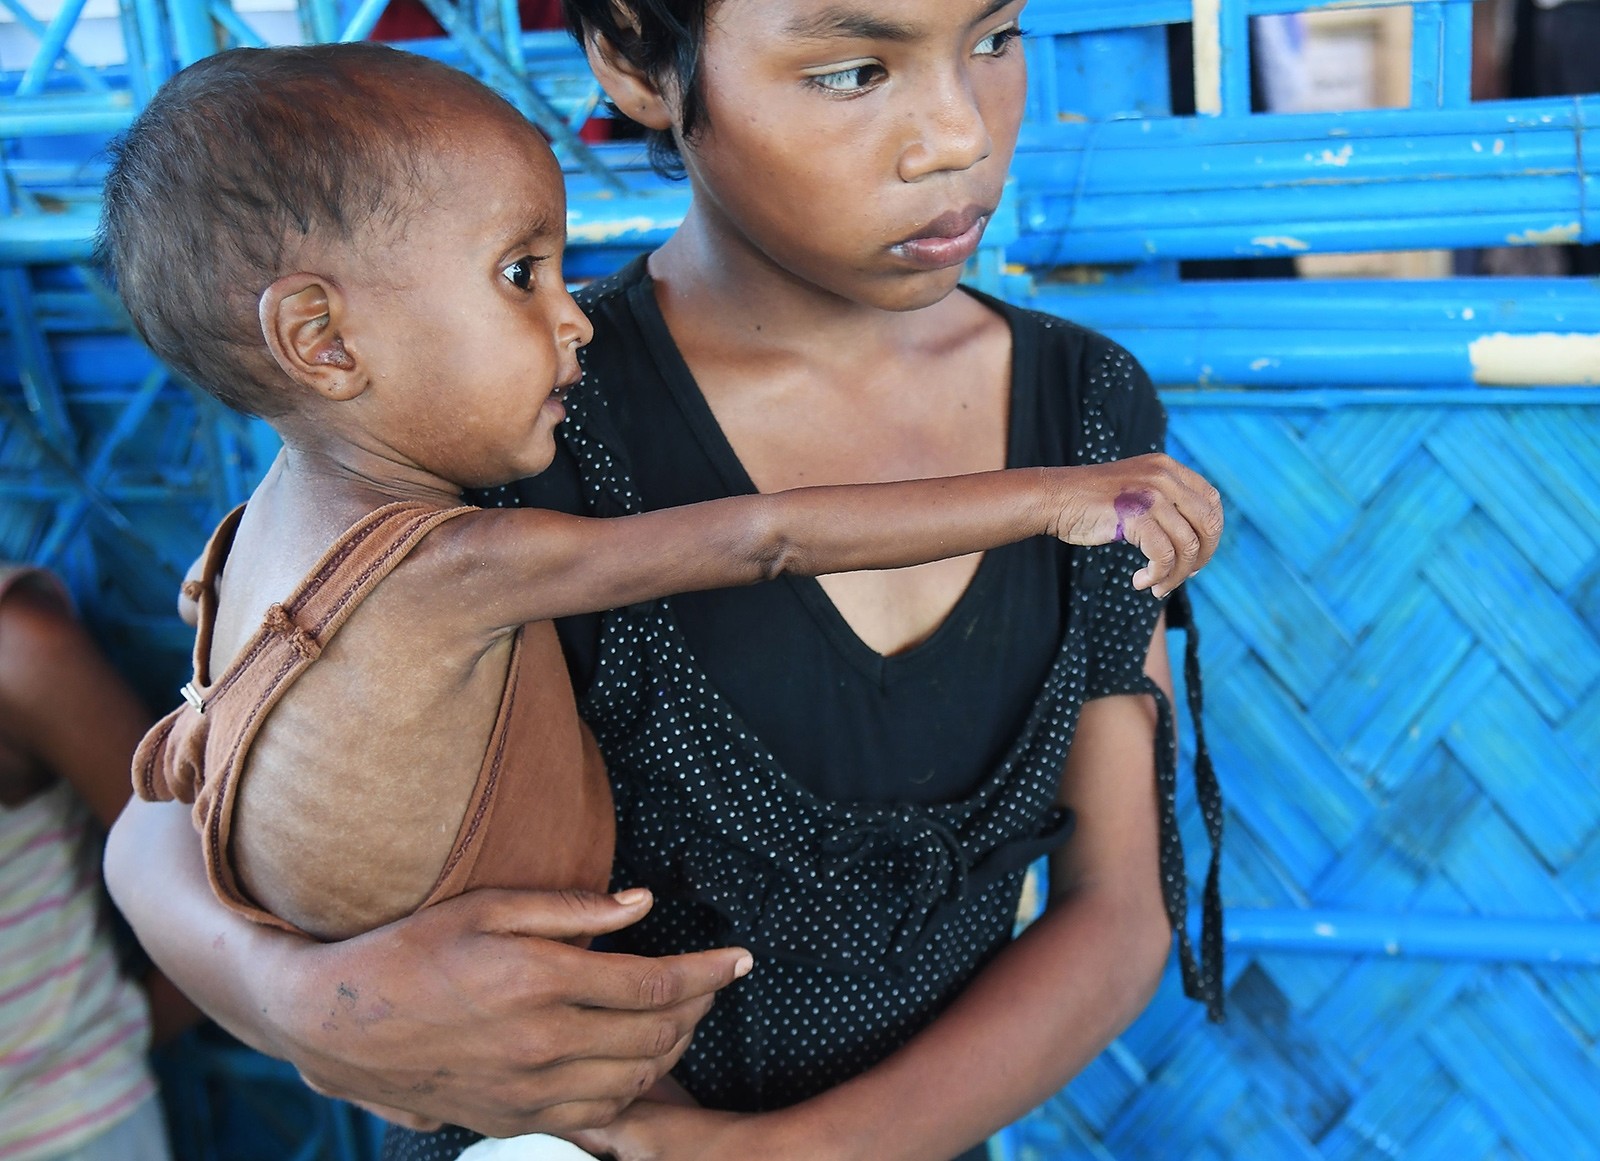 Zahid Hasan, the 1.5 years old Rohingya Muslim refugee with her sister waits to see a doctor to receive treatment for severe malnutrition at the Balukhali refugee camp in Bangladesh's Ukhia district on November 6, 2017. (AFP Photo)